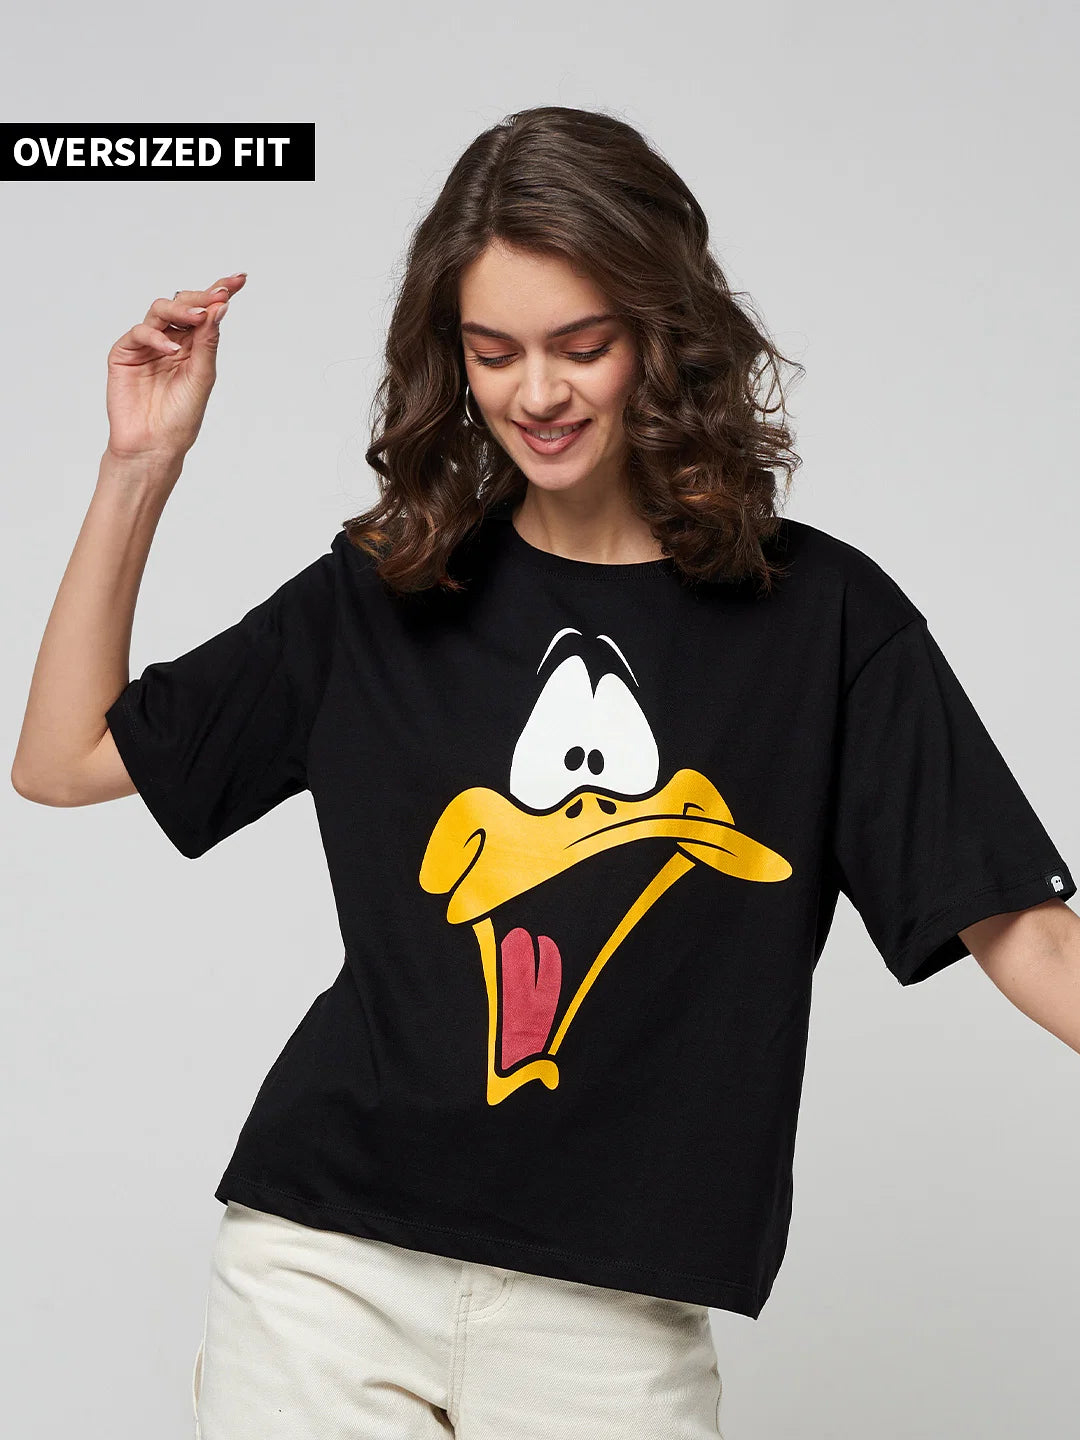 Daffy Duck What The Duck (UK version)